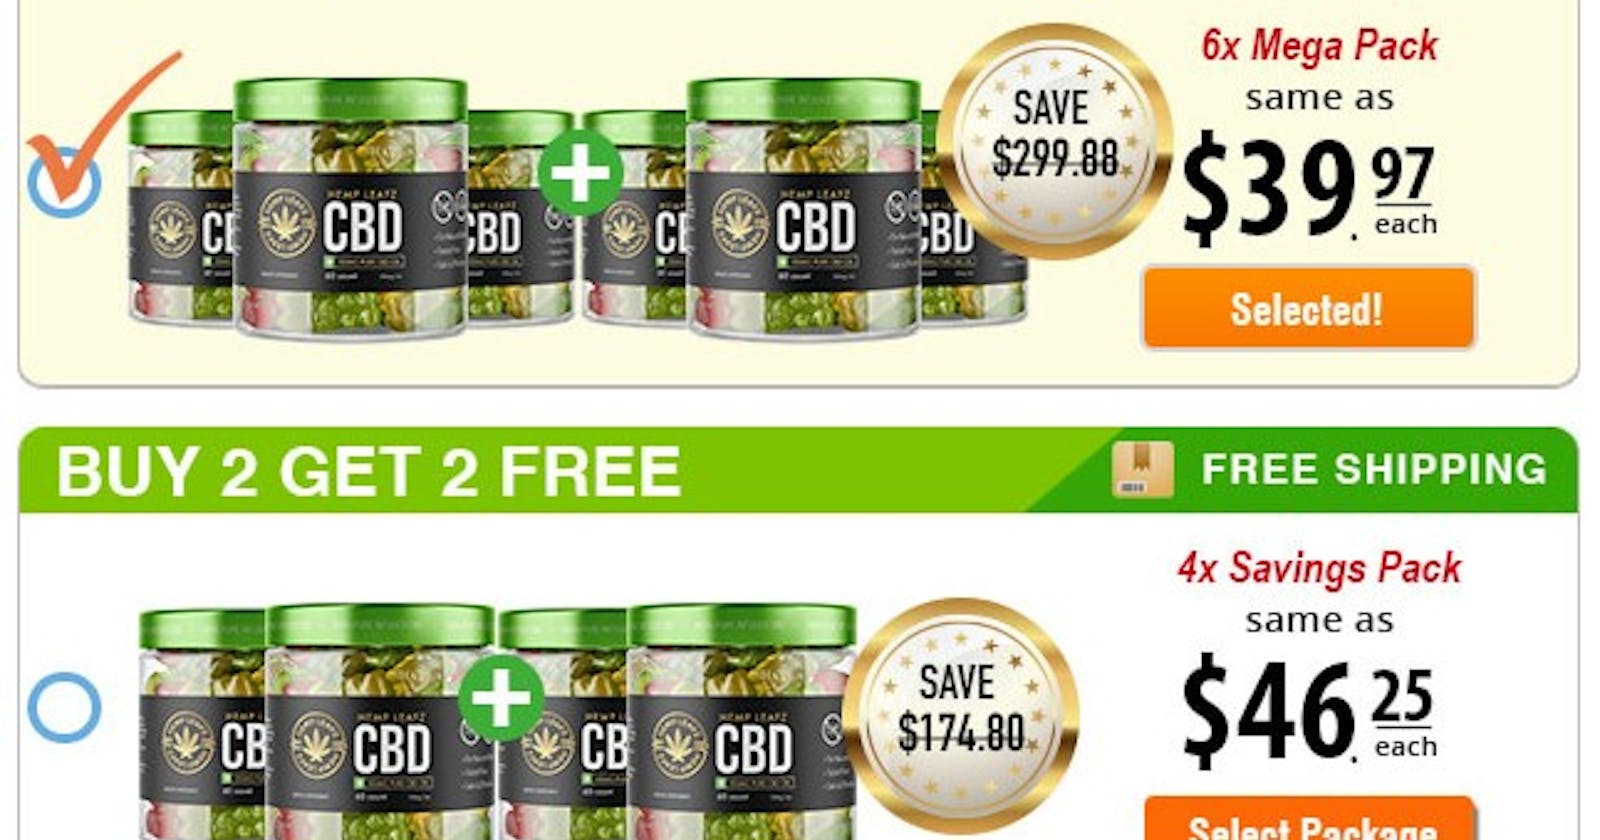 Comprehensive Guide to Green Leafz CBD Gummies in Canada: Where to Buy, Pricing, Owner Insights, Effectiveness & Green Leafz CBD Shark Tank